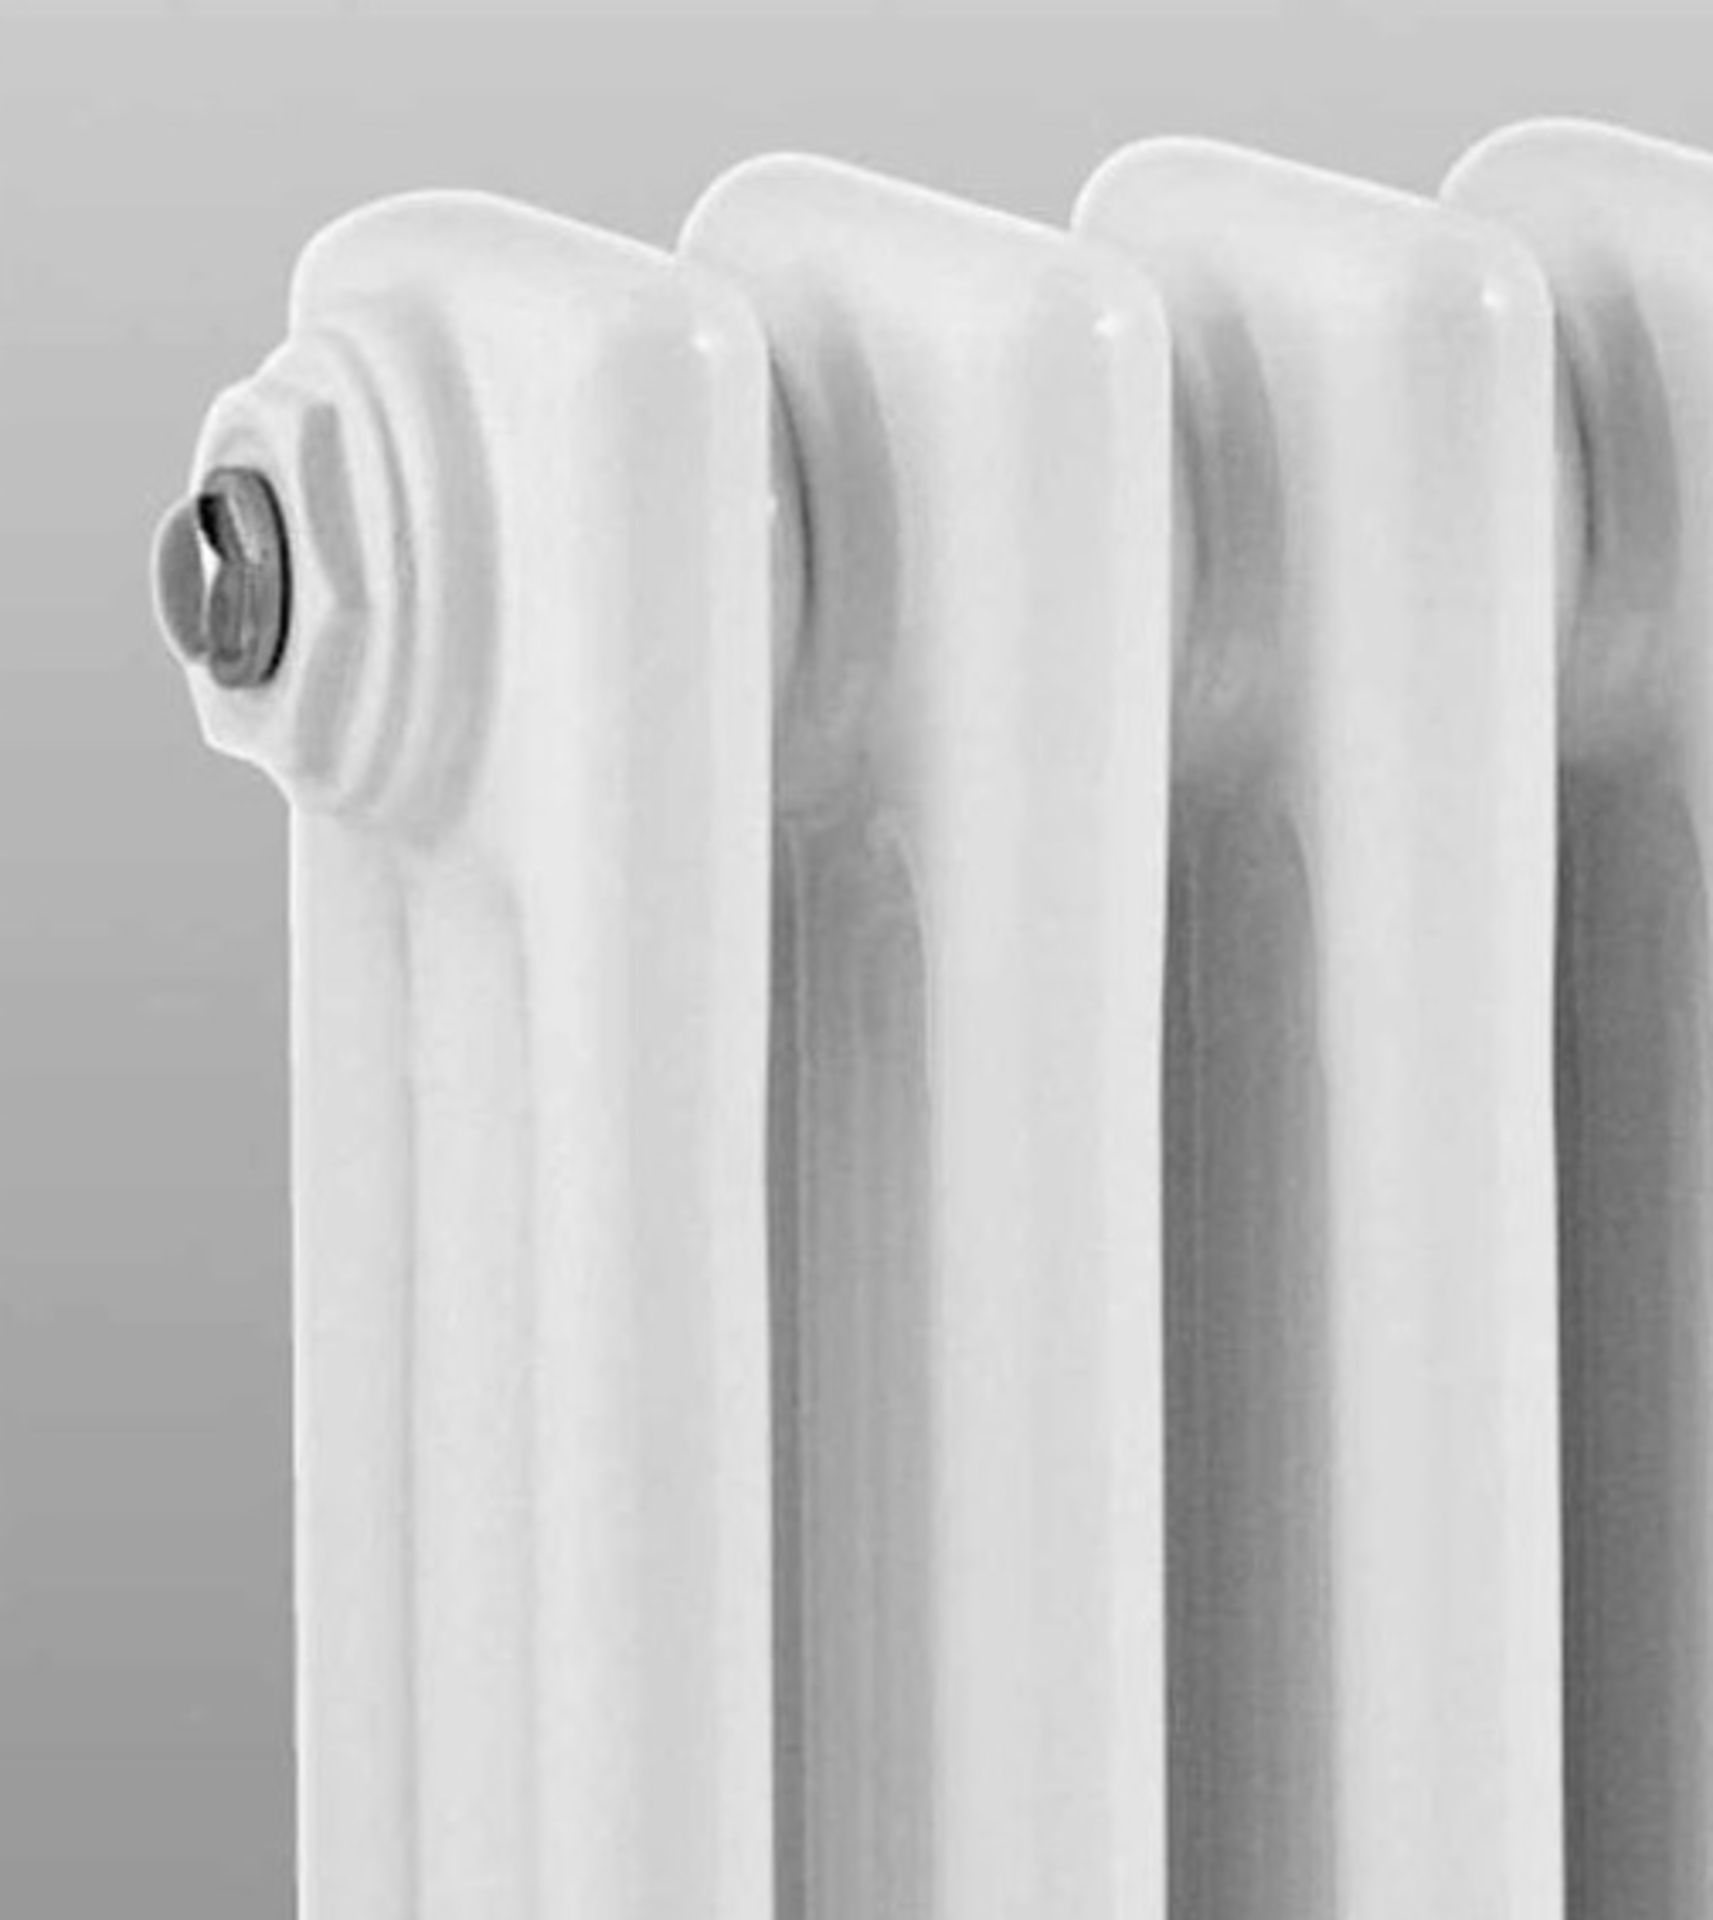 1 x Hudson Reed Colosseum Radiator 300mm x 990mm White - New & Boxed Stock - Ref: HX303 - Image 2 of 2